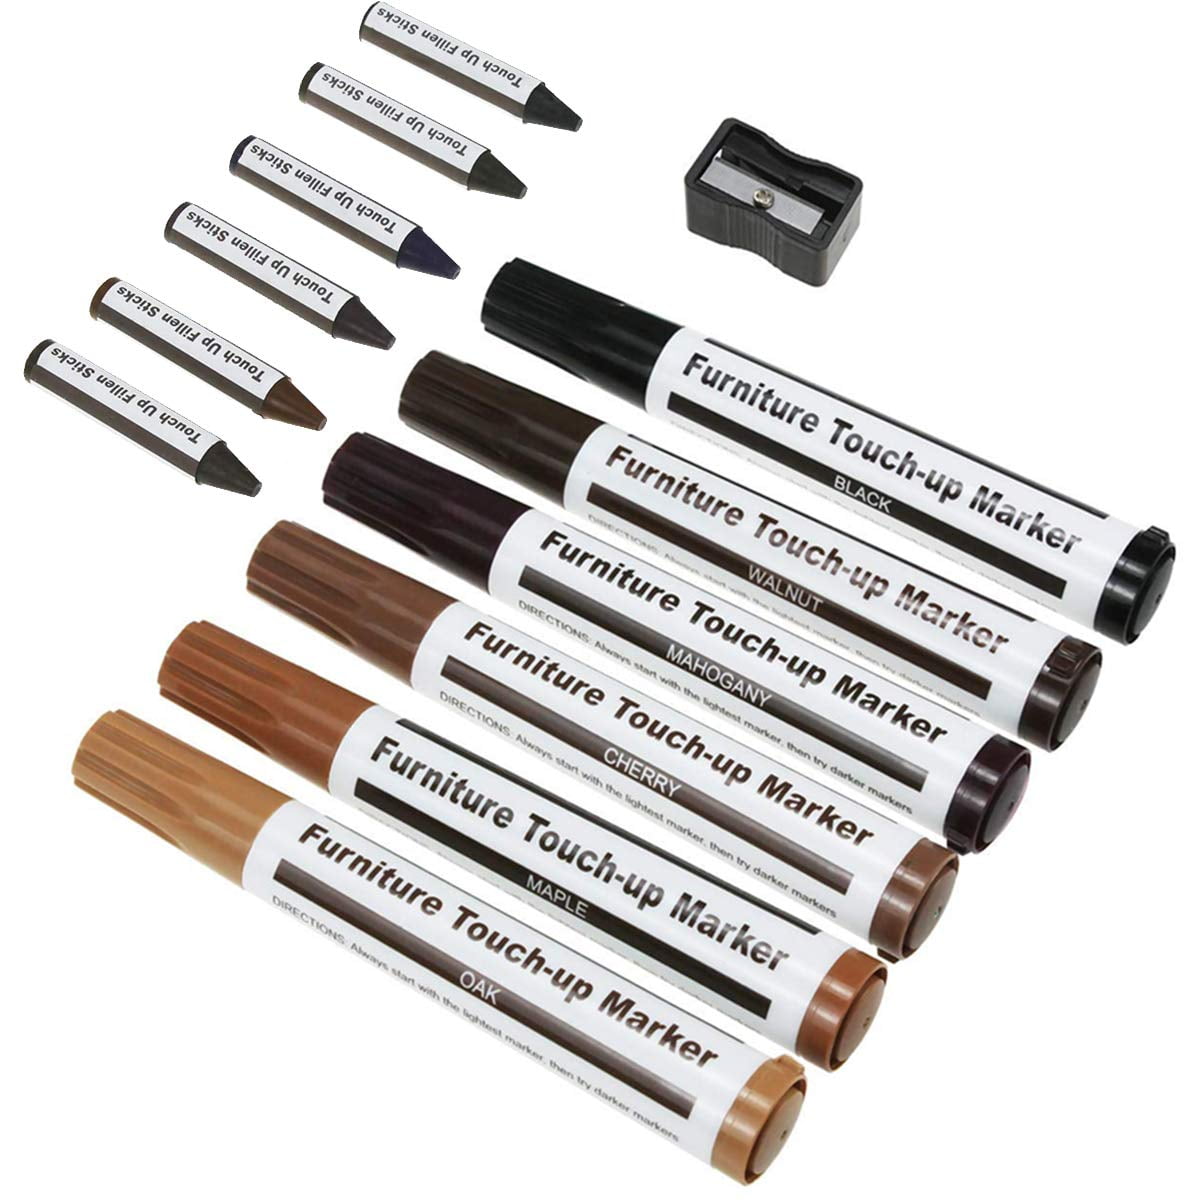 Wood Furniture Touch Up Markers Wood Stain Scratch Repair Non Toxic 6 Shades 